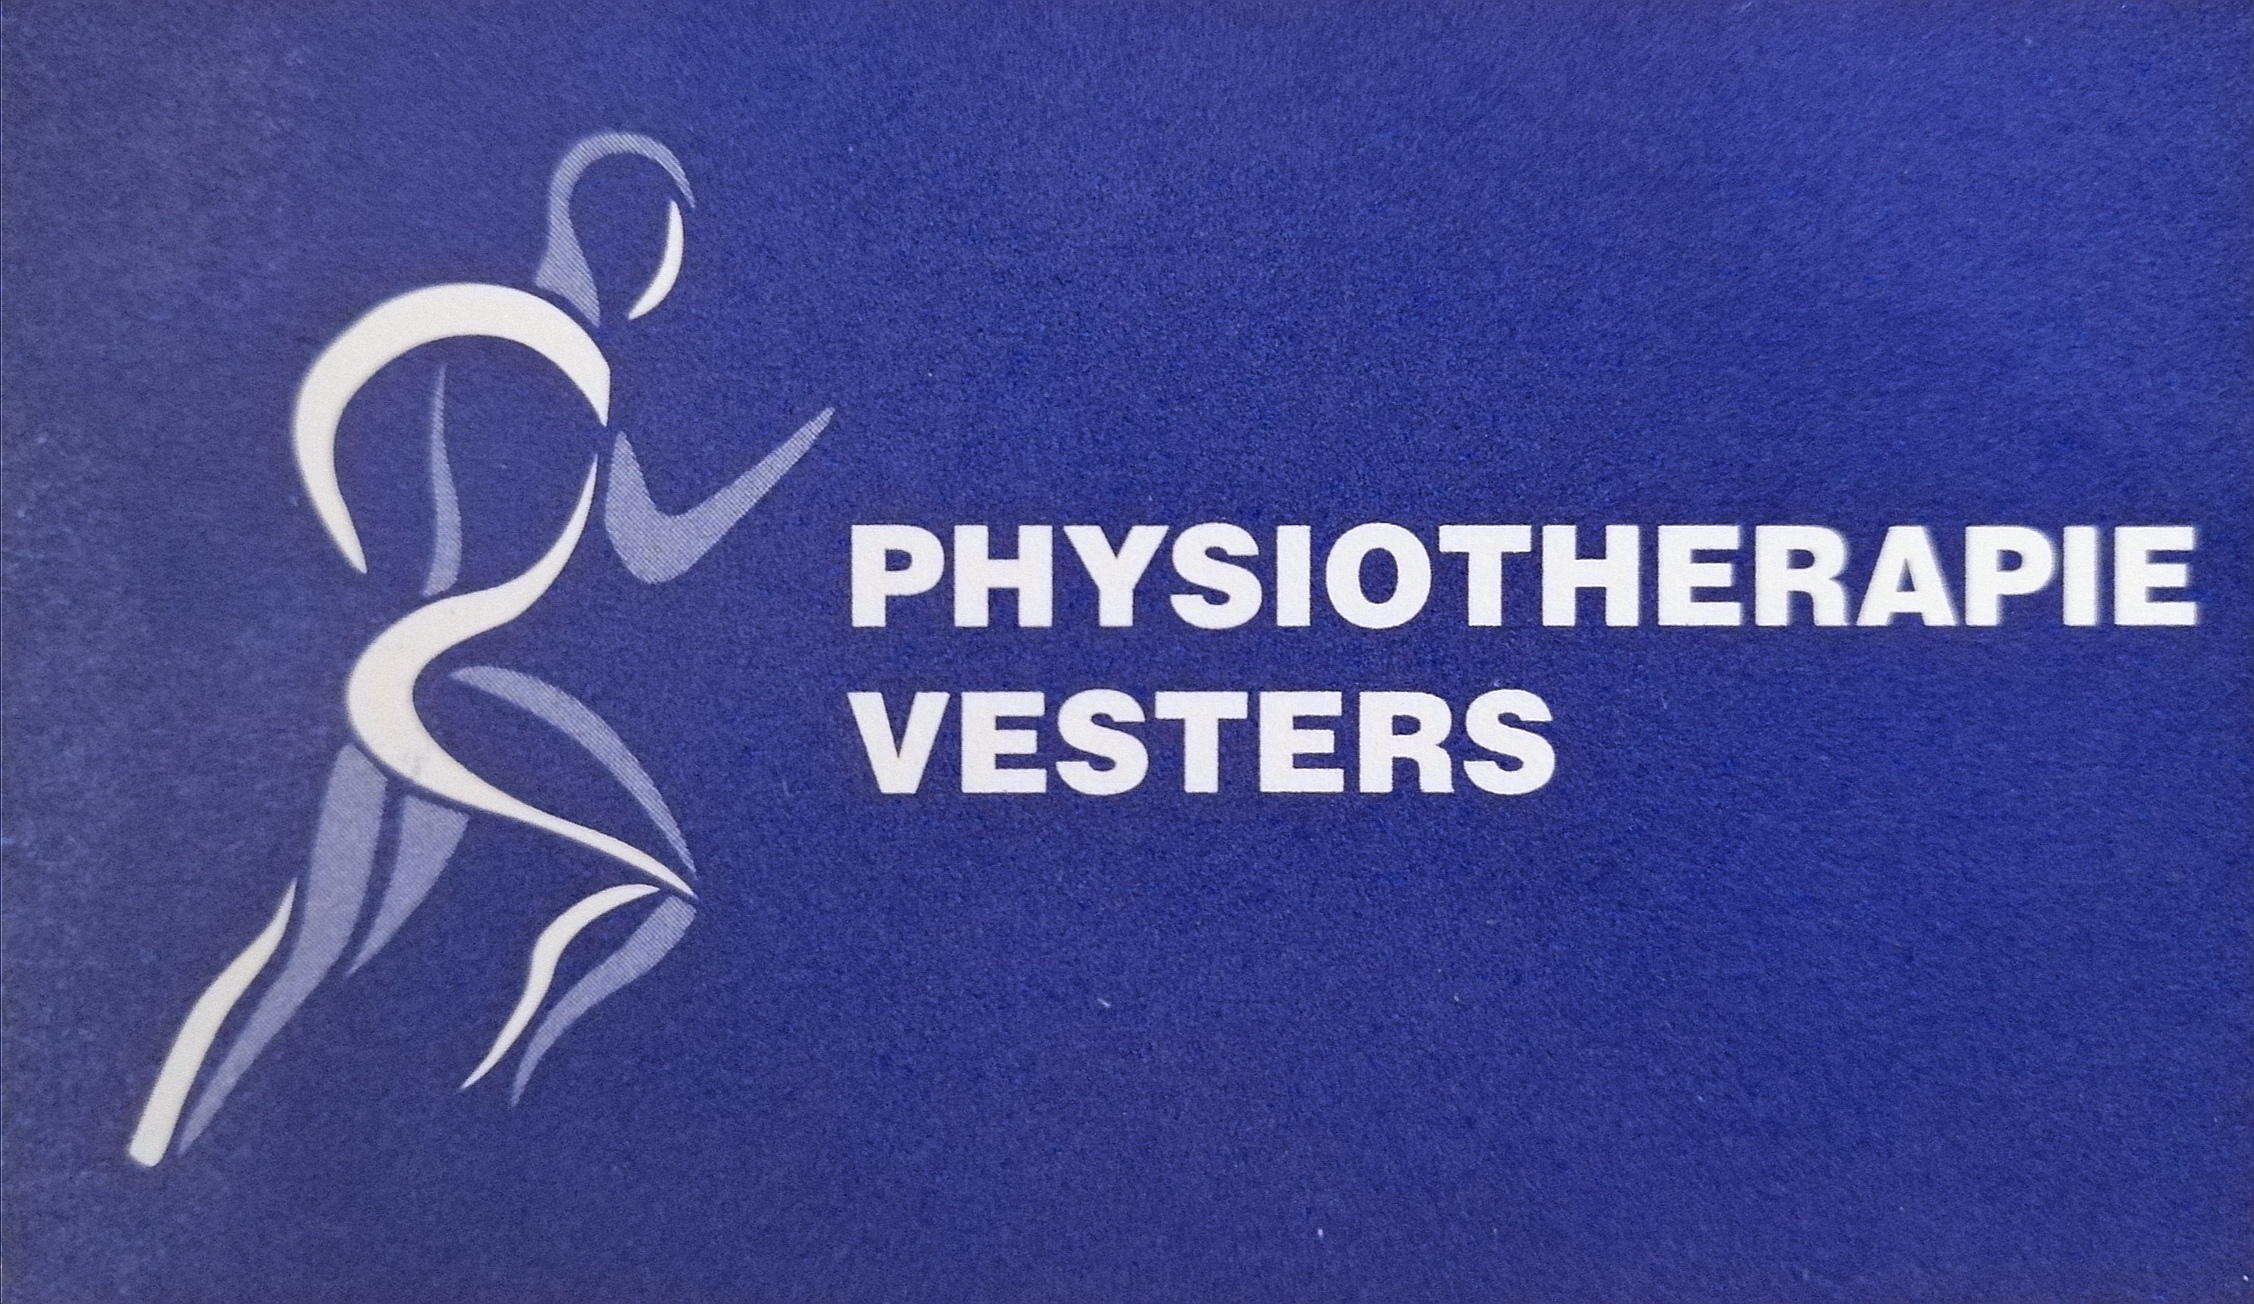 Physiotherapie Vesters GmbH